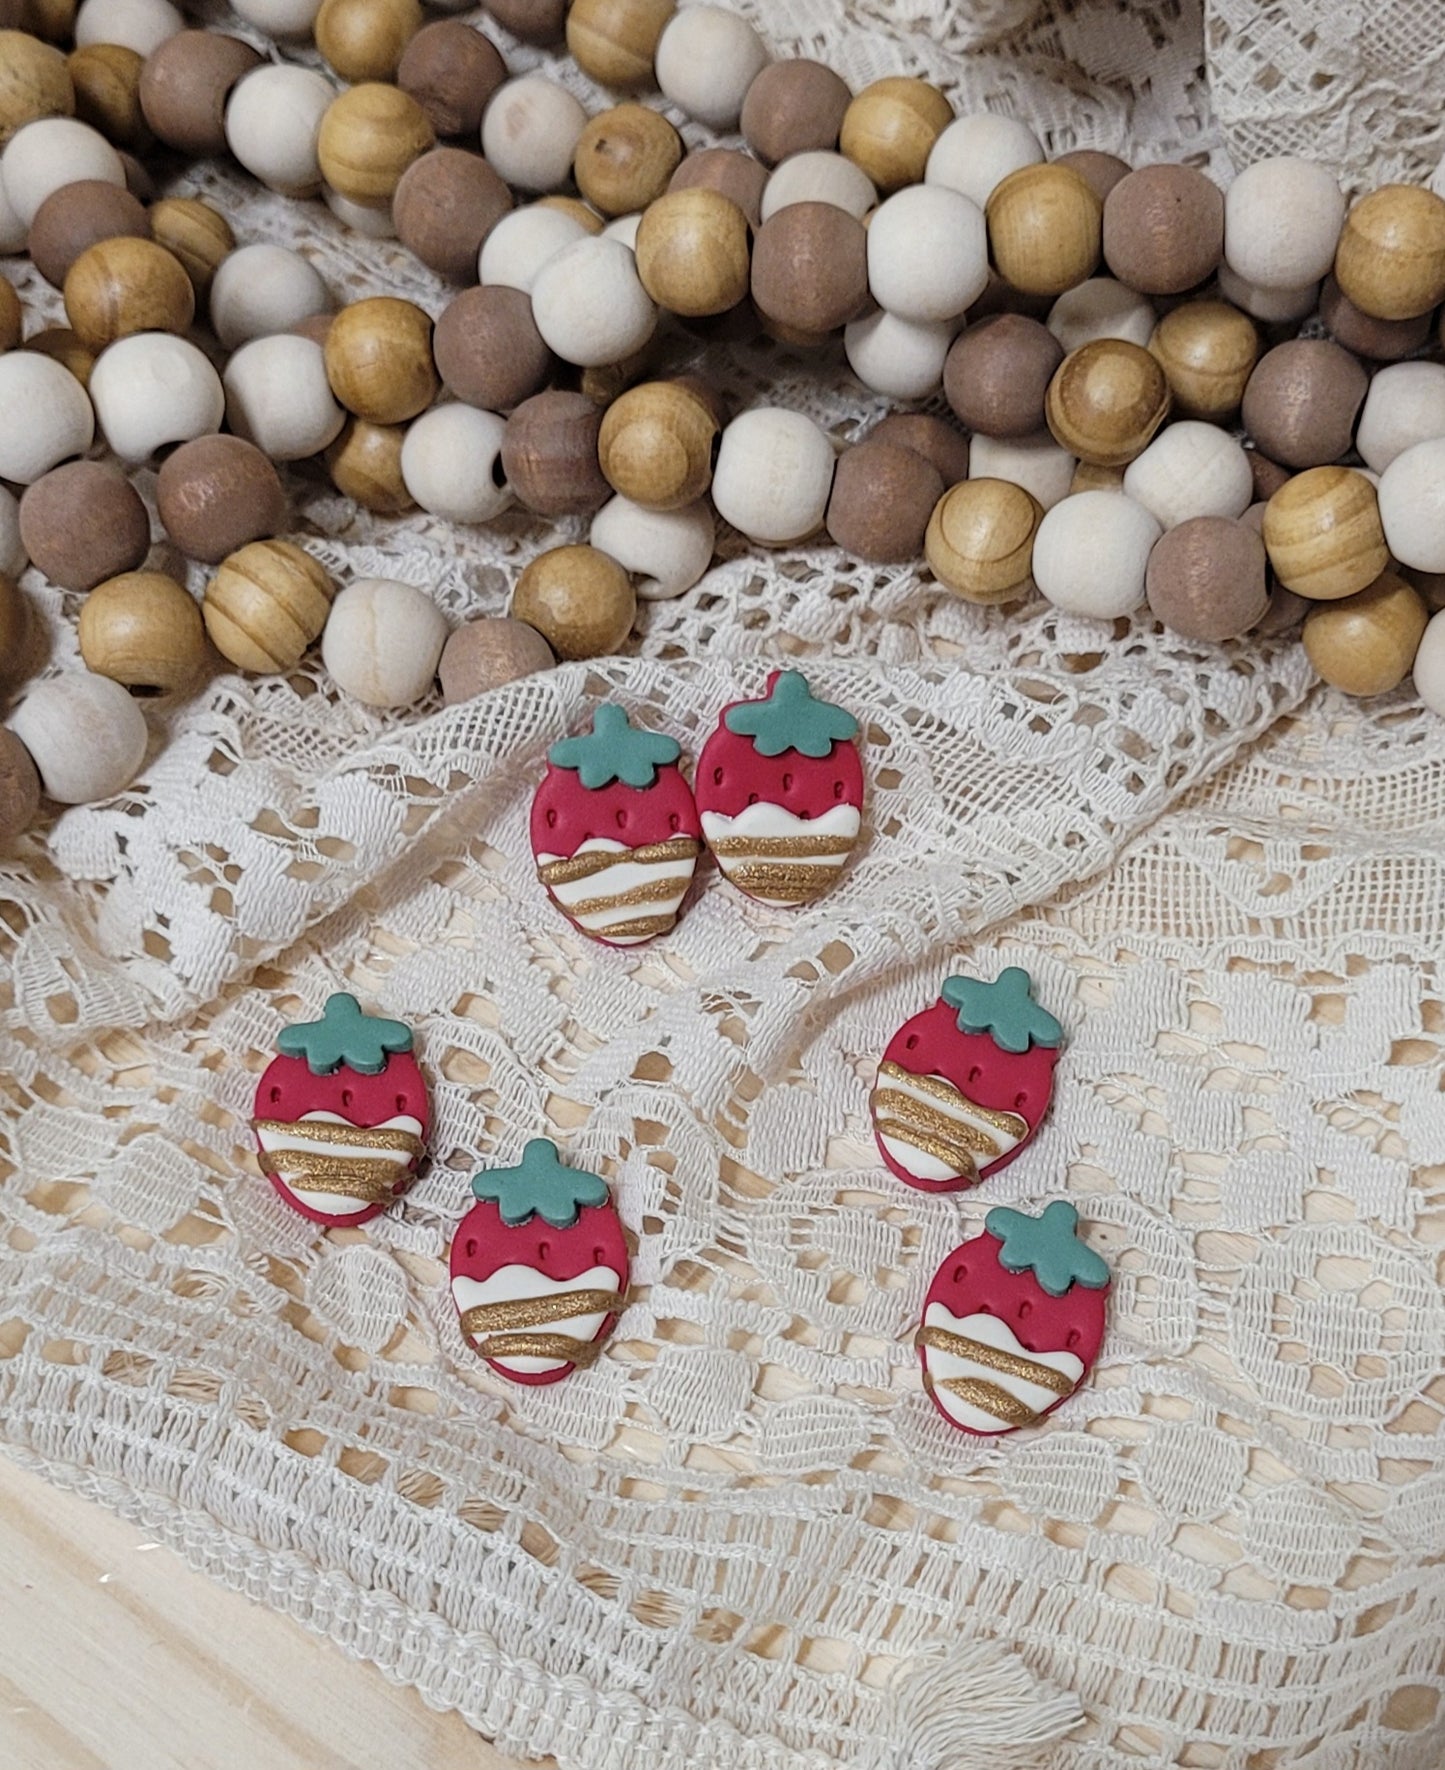 White Chocolate Carmel Drizzled Strawberry Earrings